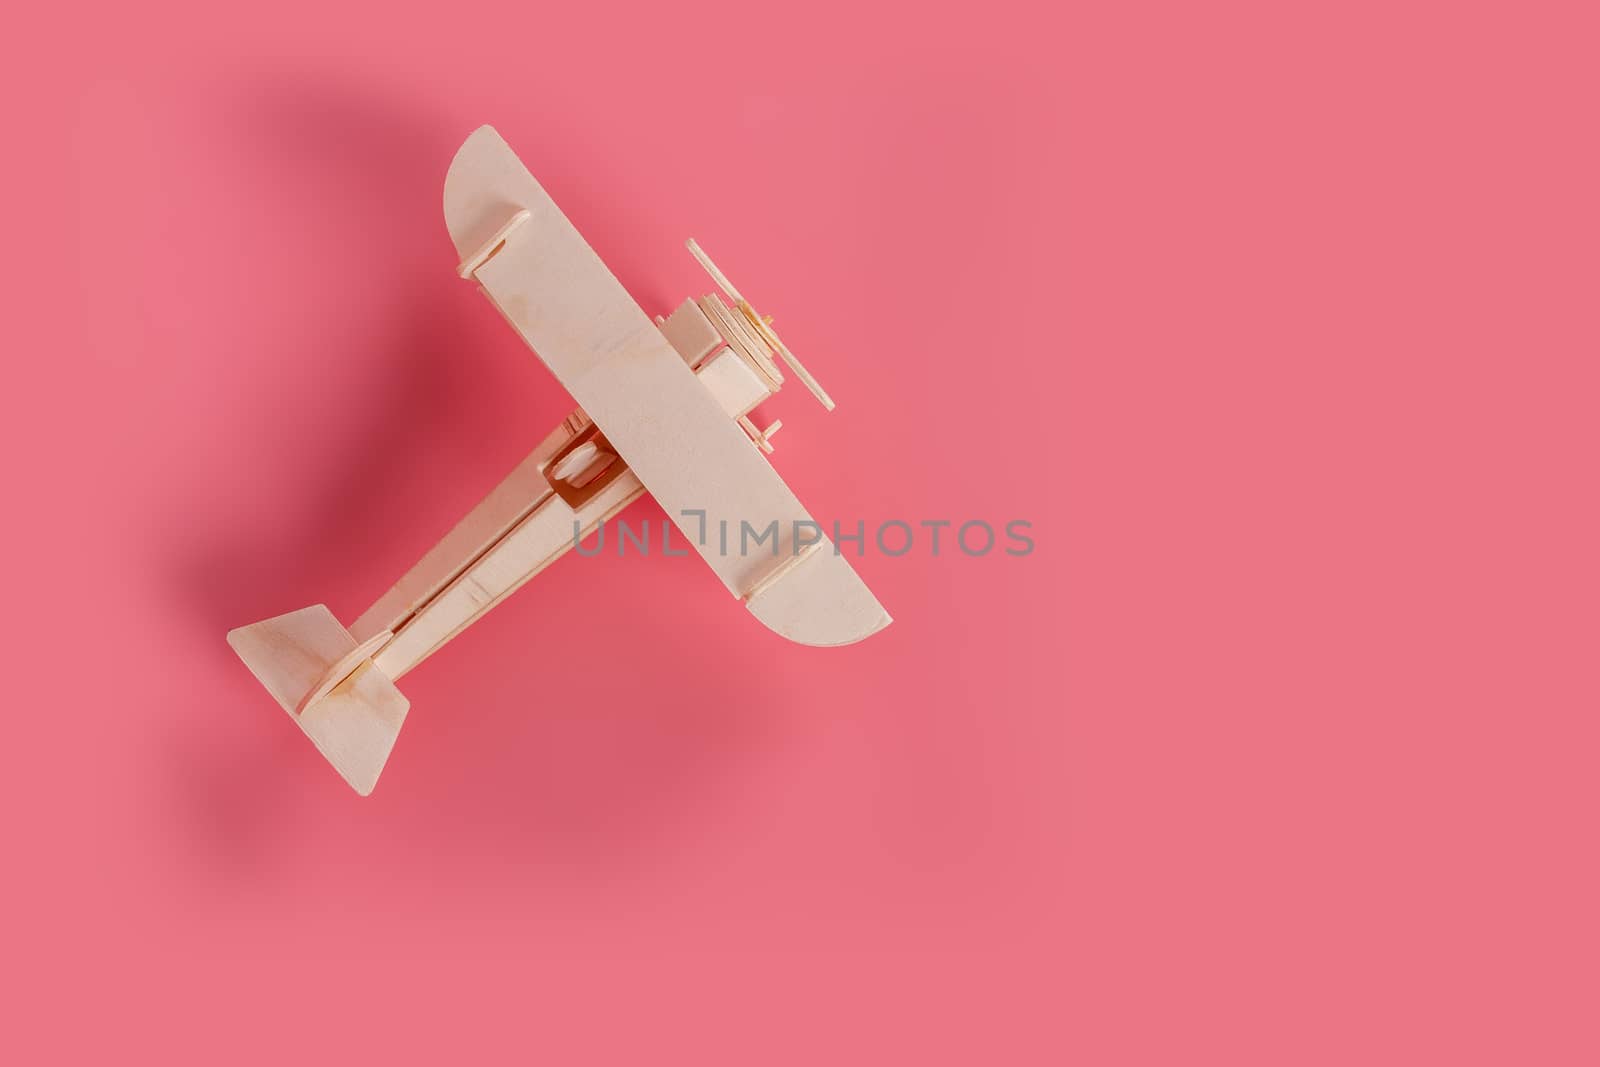 Wooden airplane toy on a pastel pink background by bnmk0819